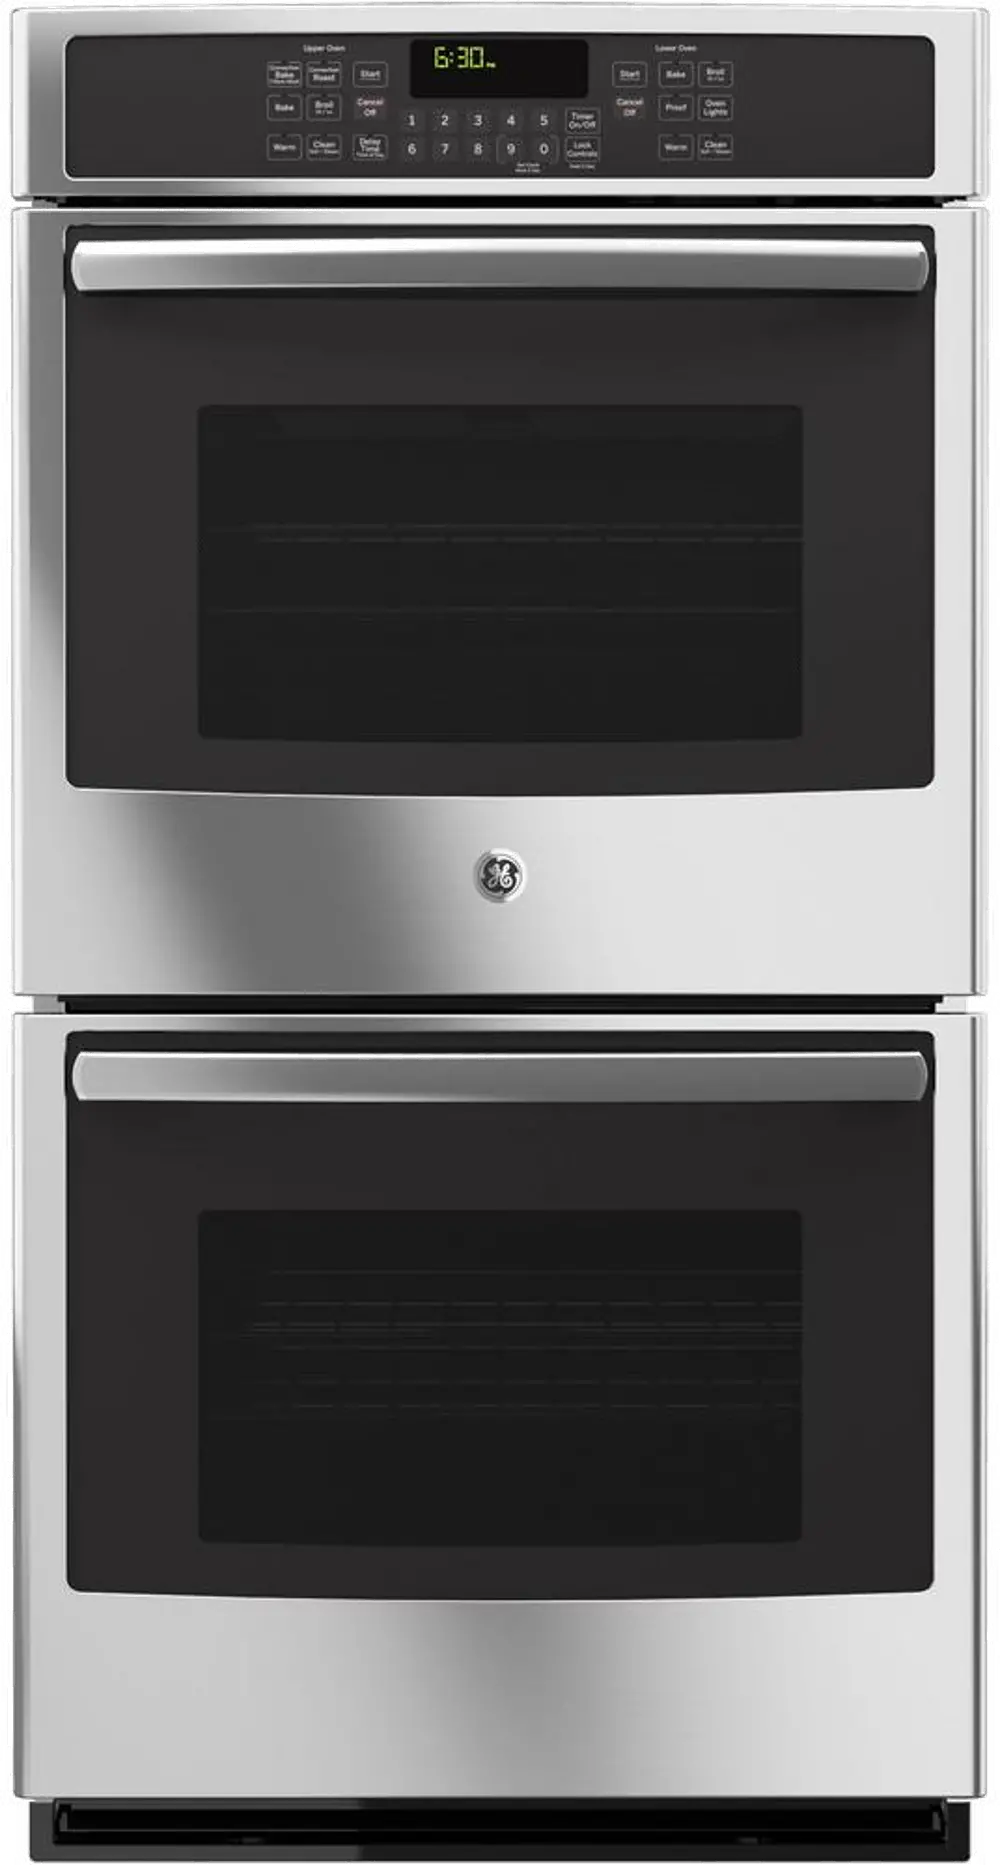 JK5500SFSS GE 27 Inch Double Wall Oven - 8.6 cu. ft. Stainless Steel-1